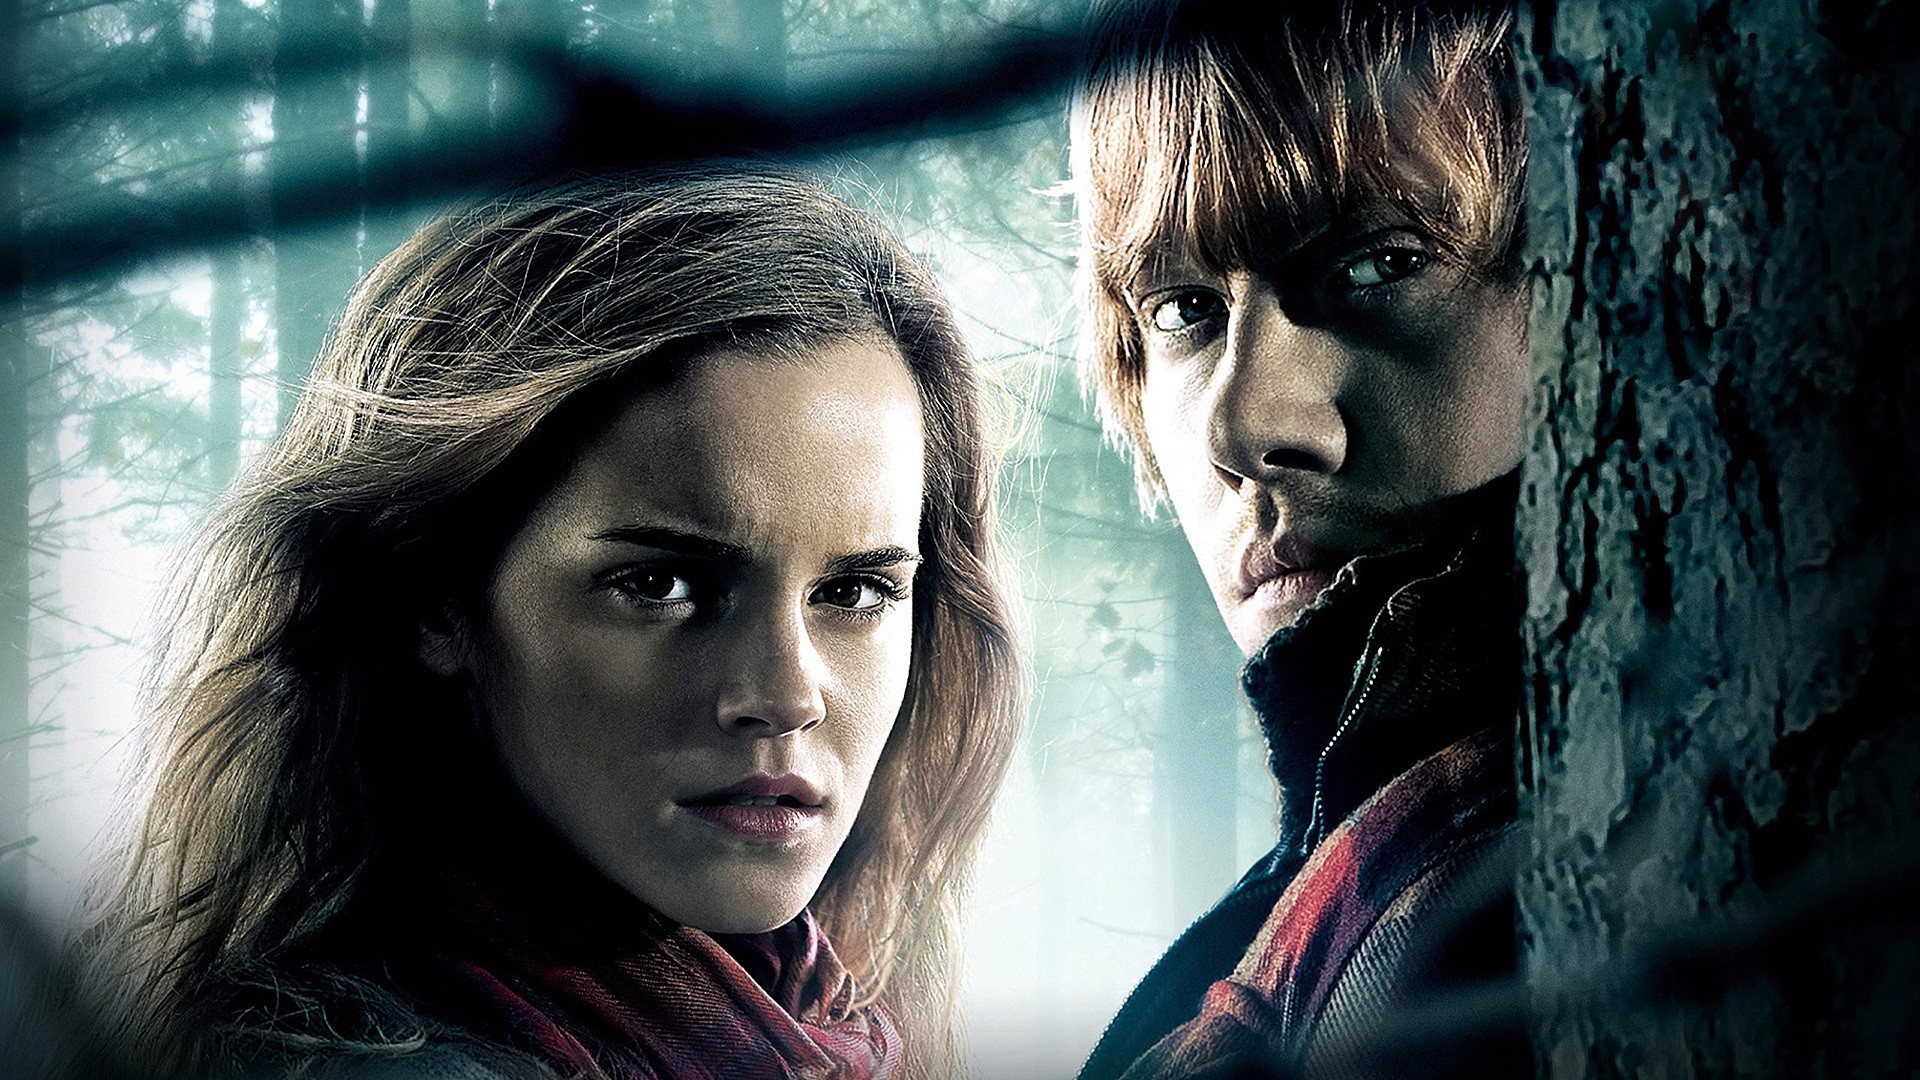 harry potter, movie, harry potter and the deathly hallows: part 1, emma watson, hermione granger, ron weasley, rupert grint